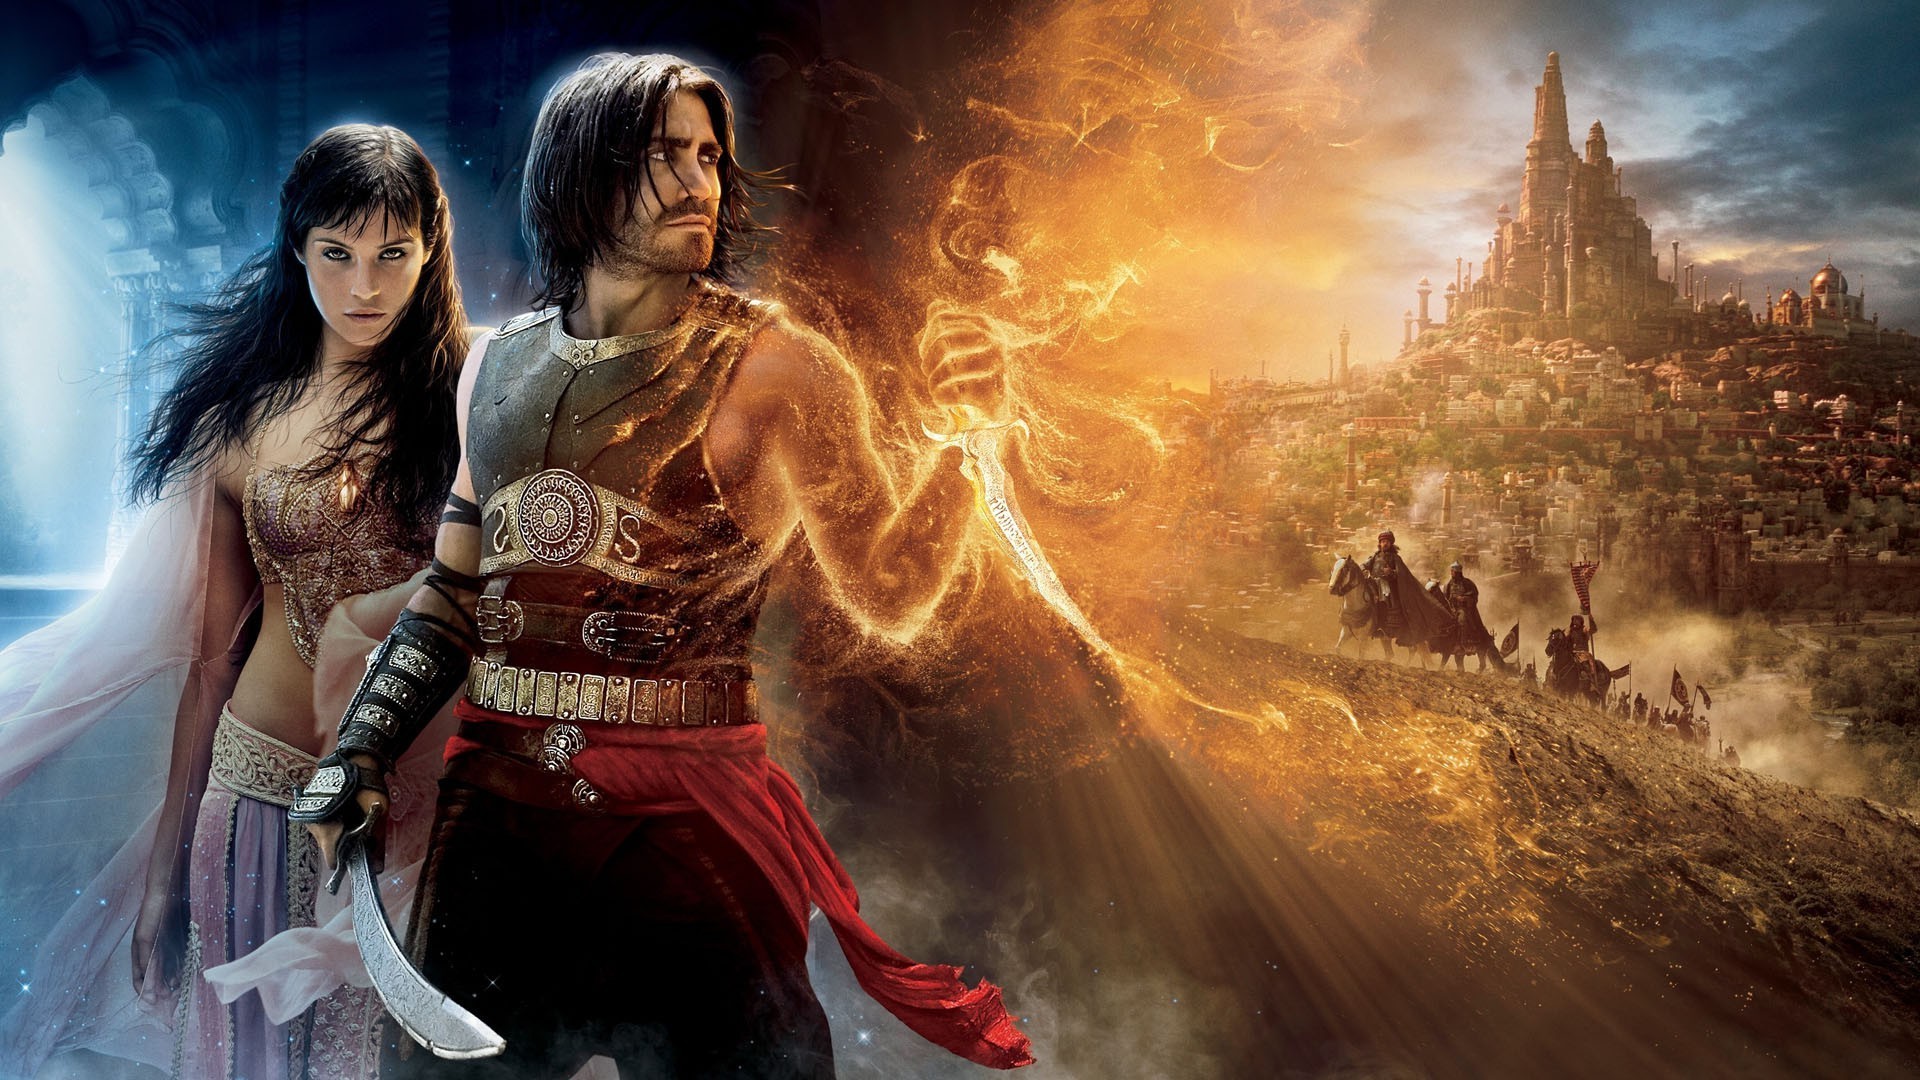 prince-of-persia-prince-of-persia-pc-archives